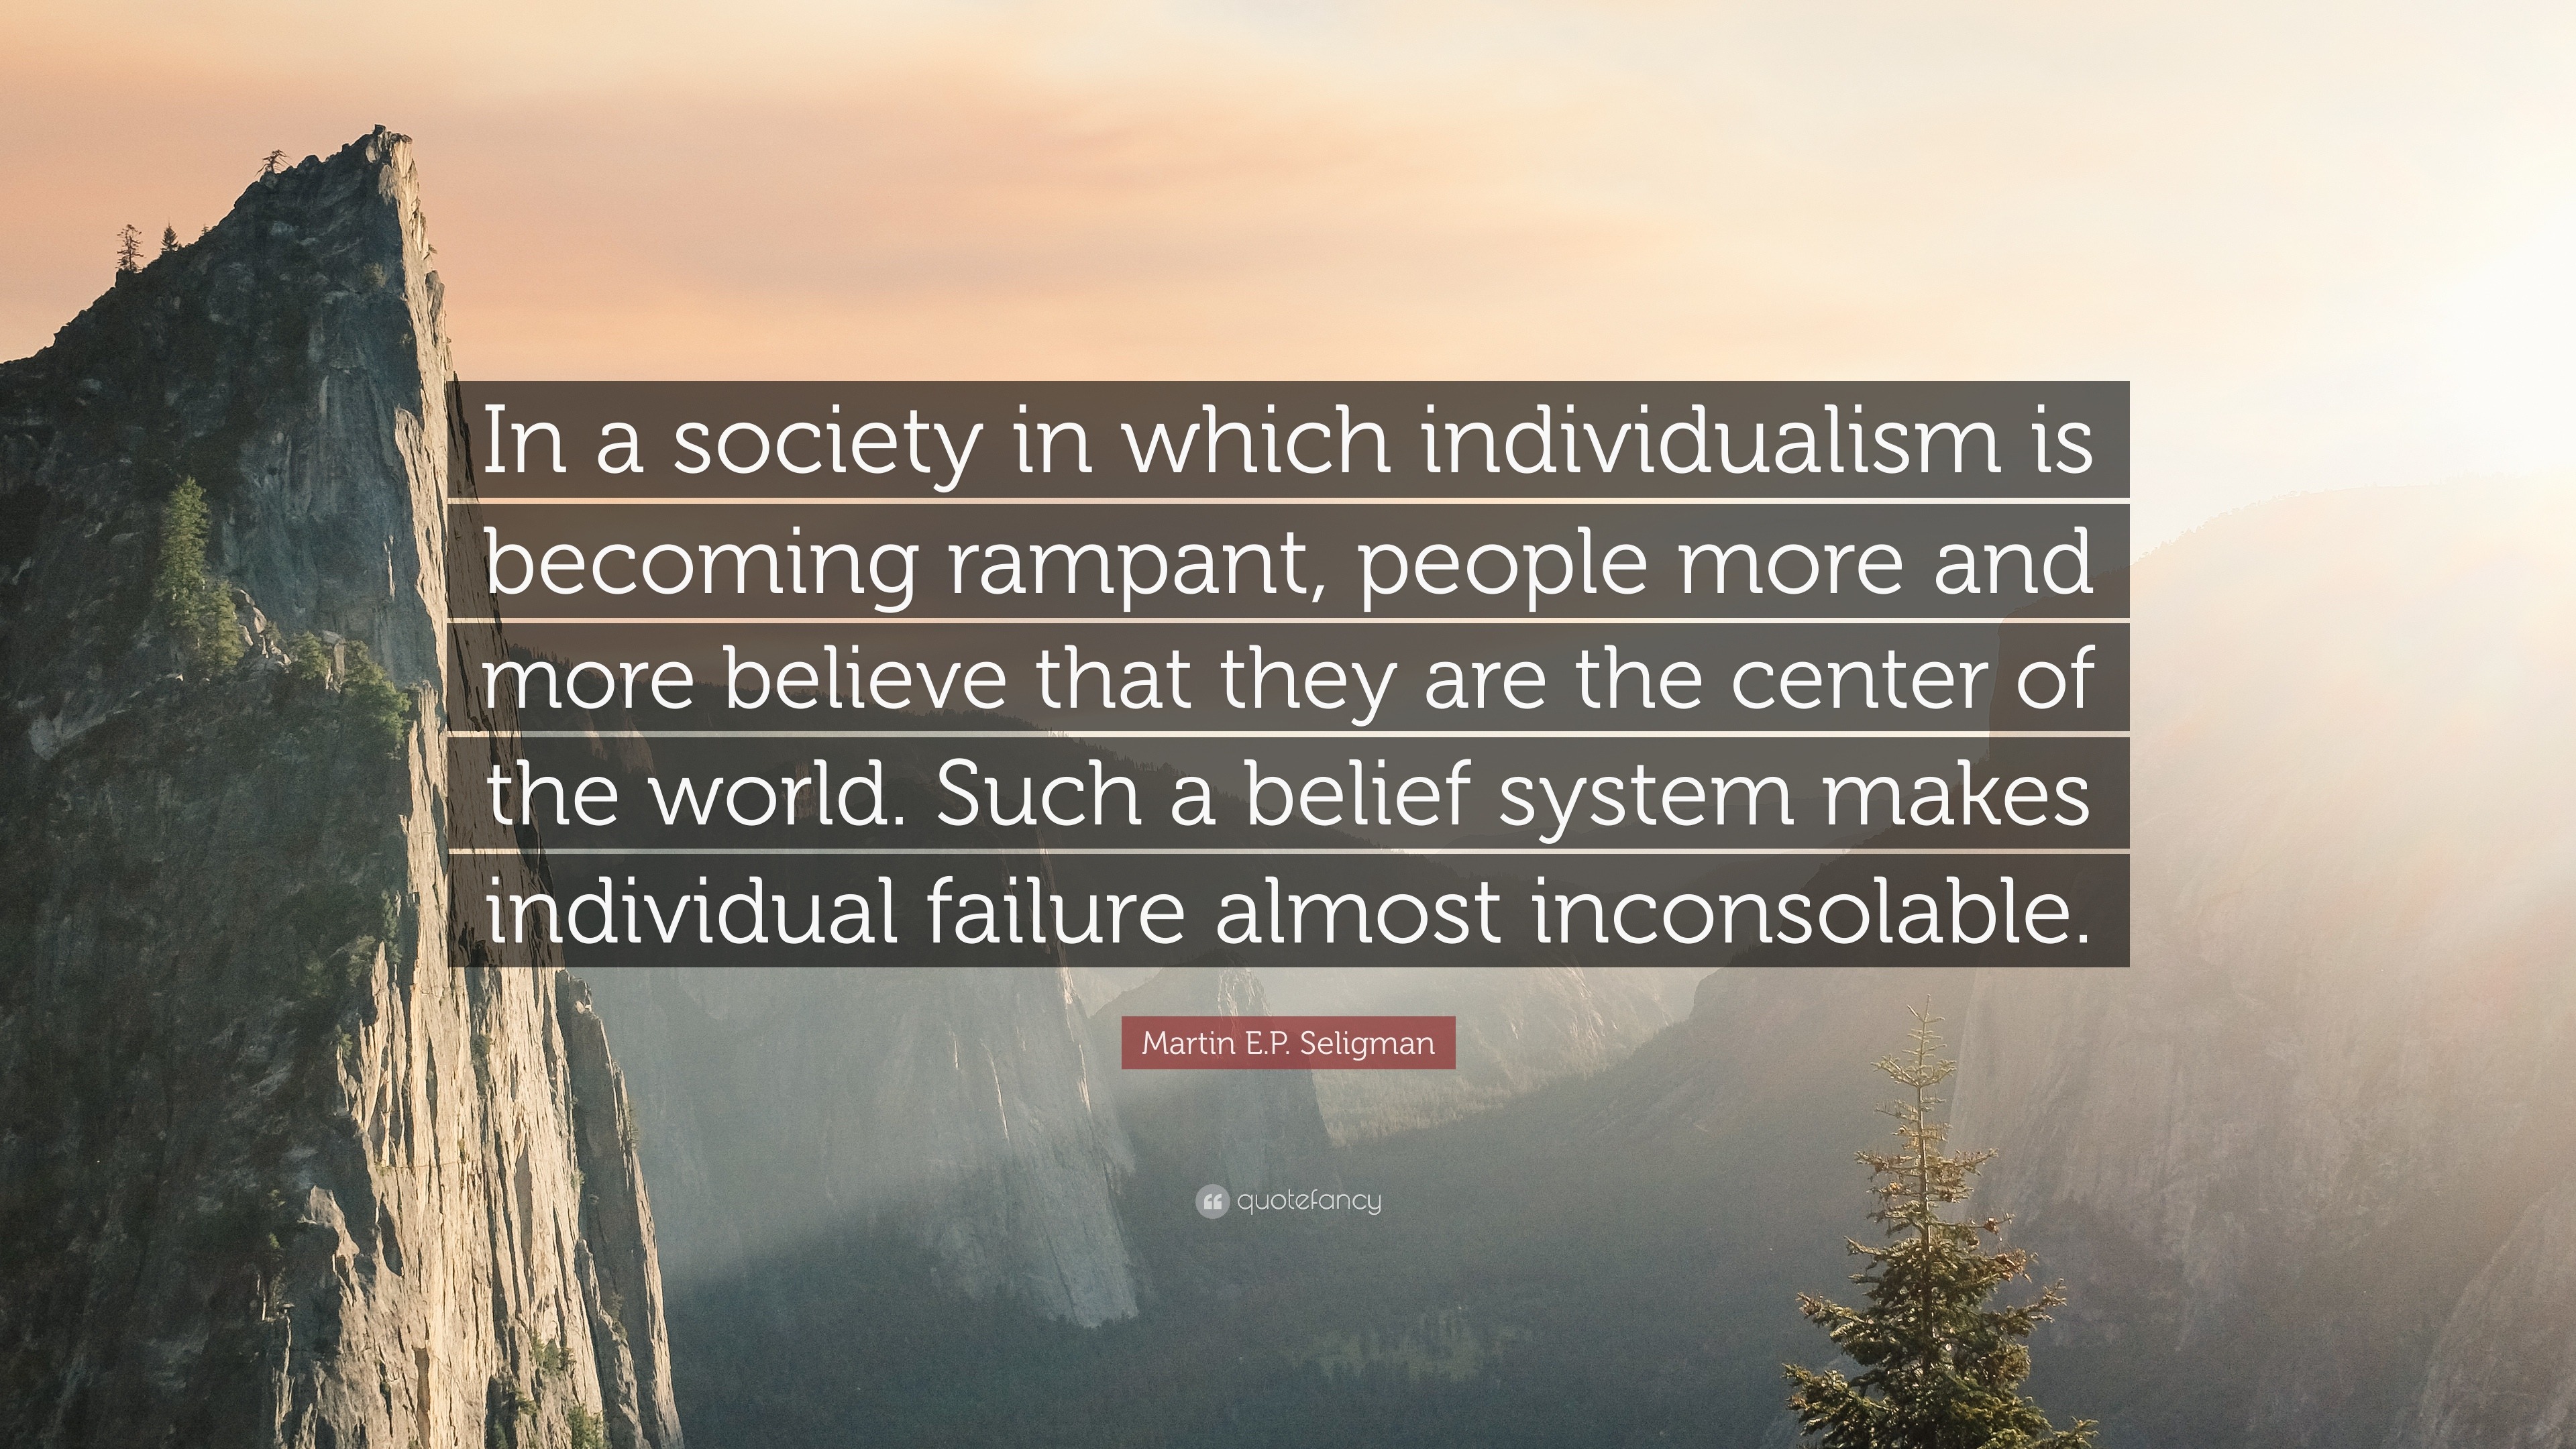 Martin E P Seligman Quote In A Society In Which Individualism Is Becoming Rampant People More And More Believe That They Are The Center Of The Wo